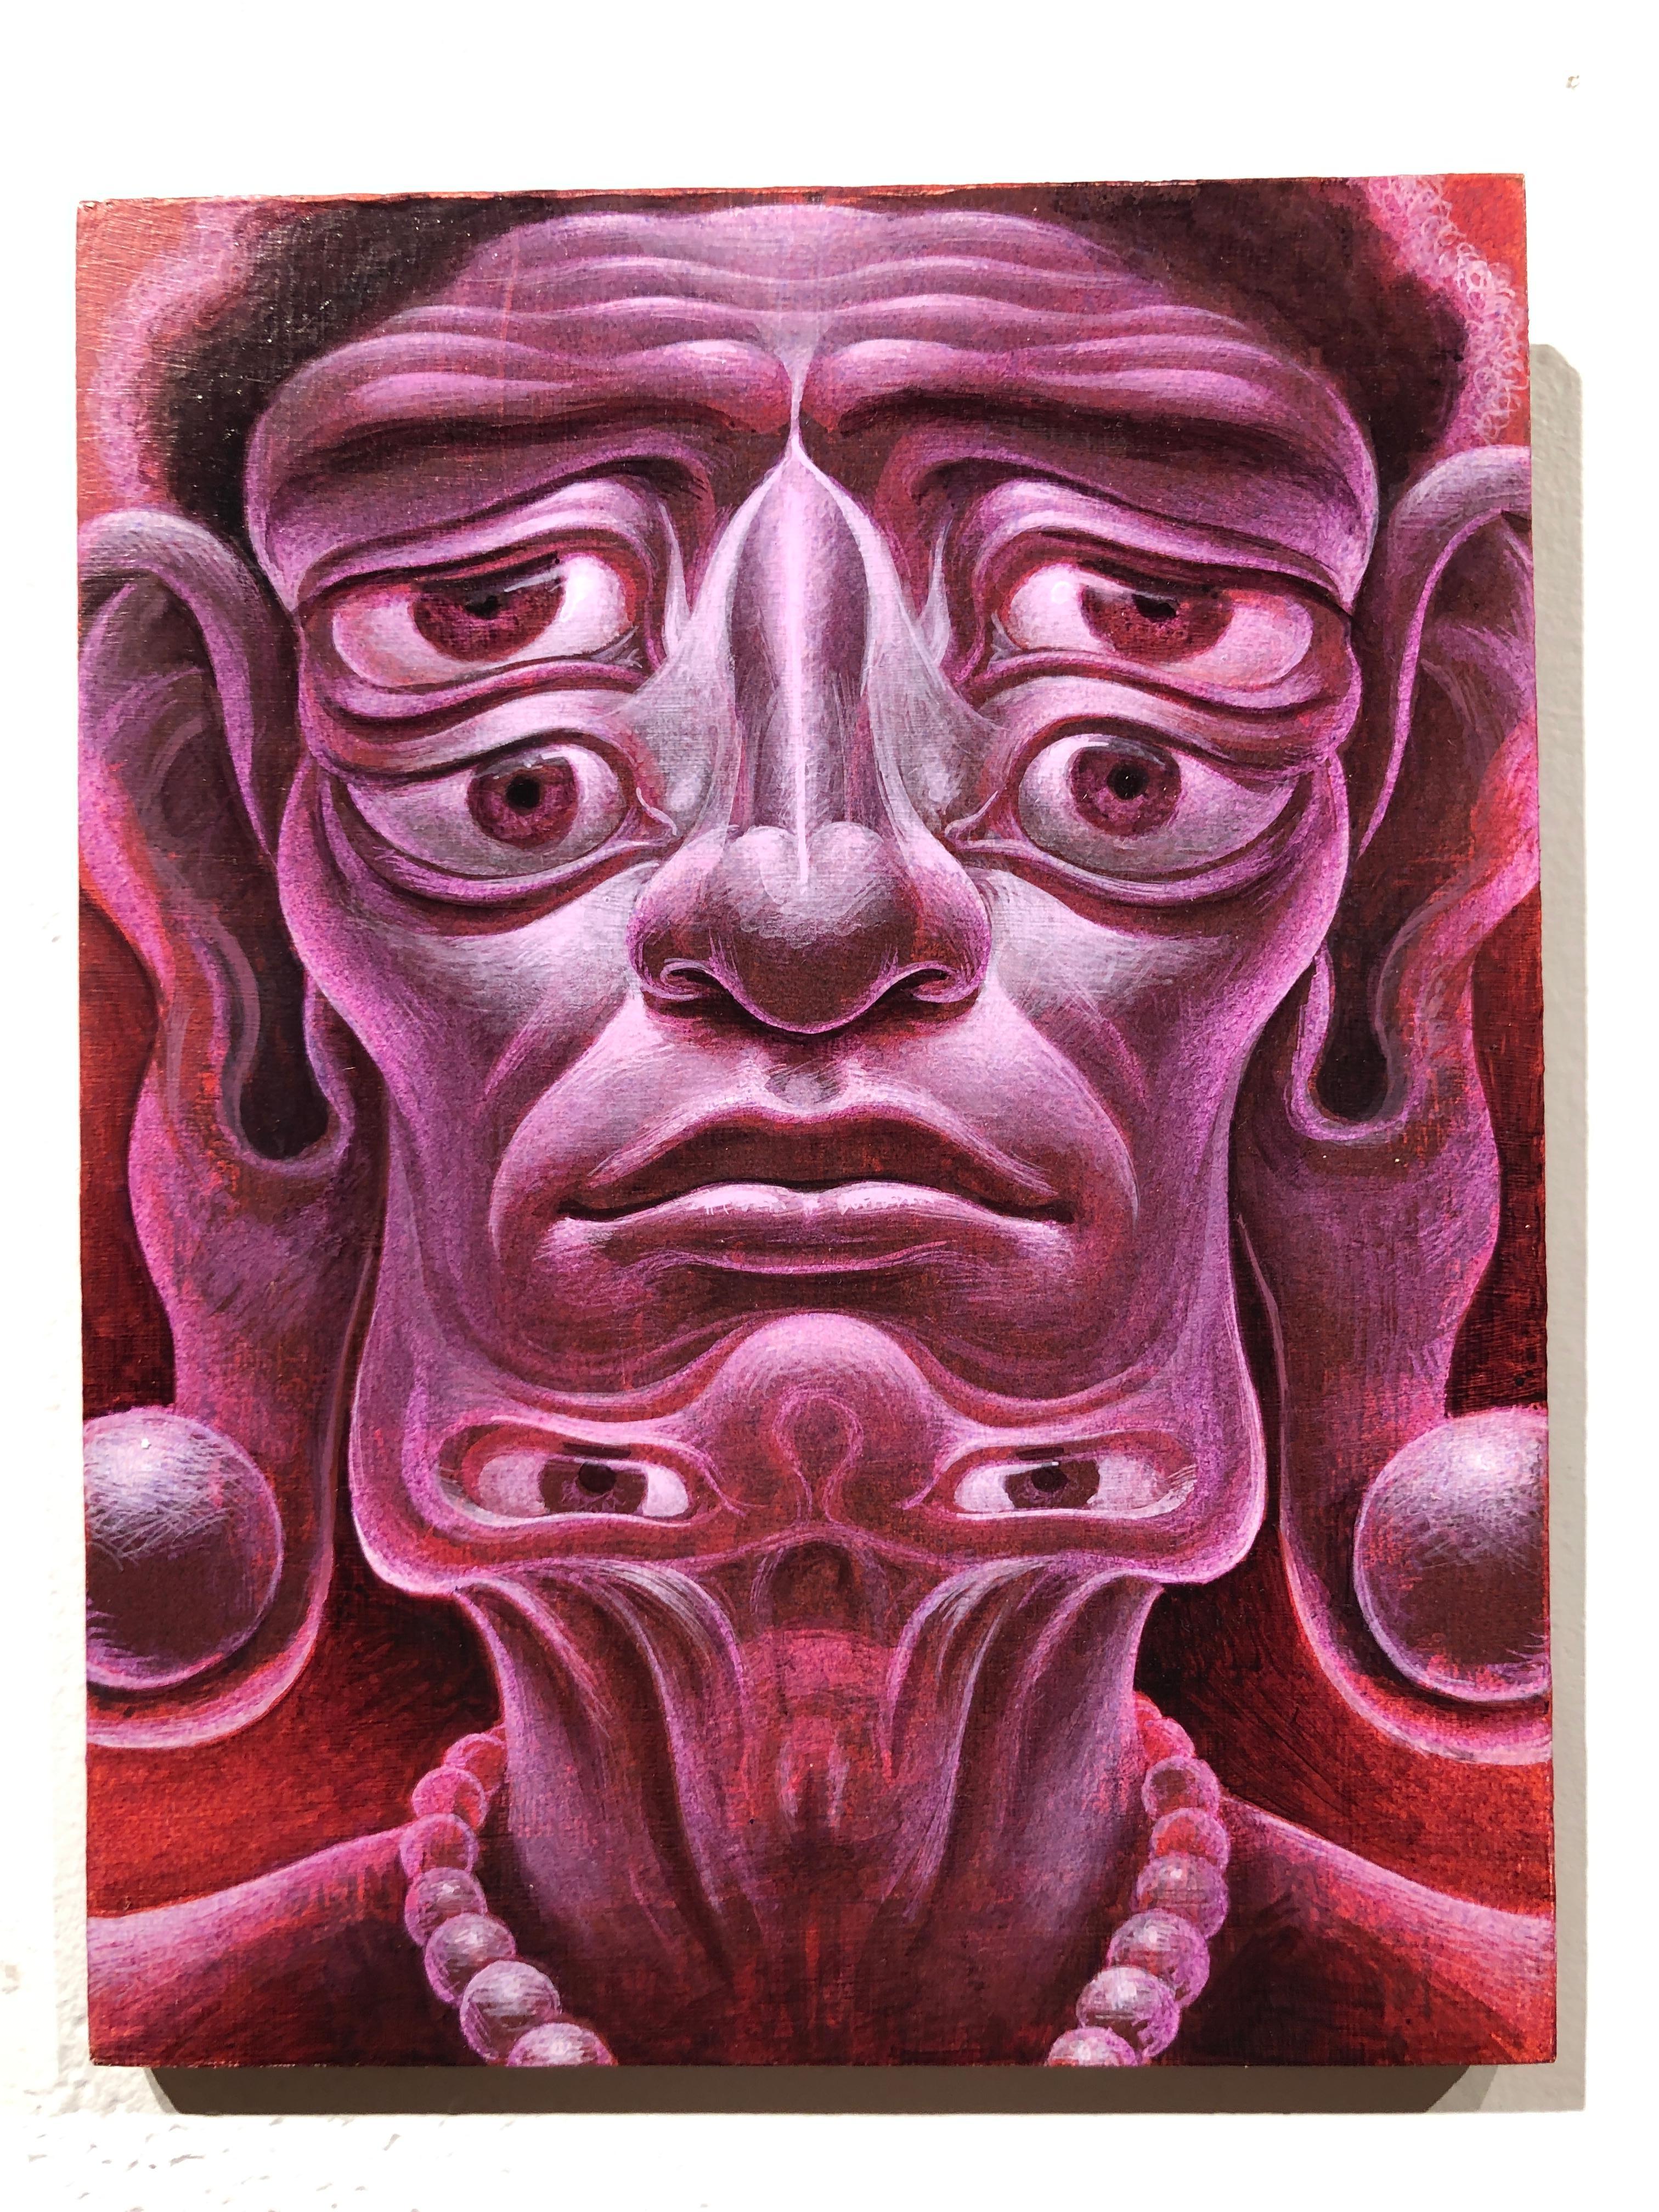 Totemic Arhat - Surreal Buddhist Figure of Enlightenment, Acrylic on Panel - Painting by Oliver Hazard Benson